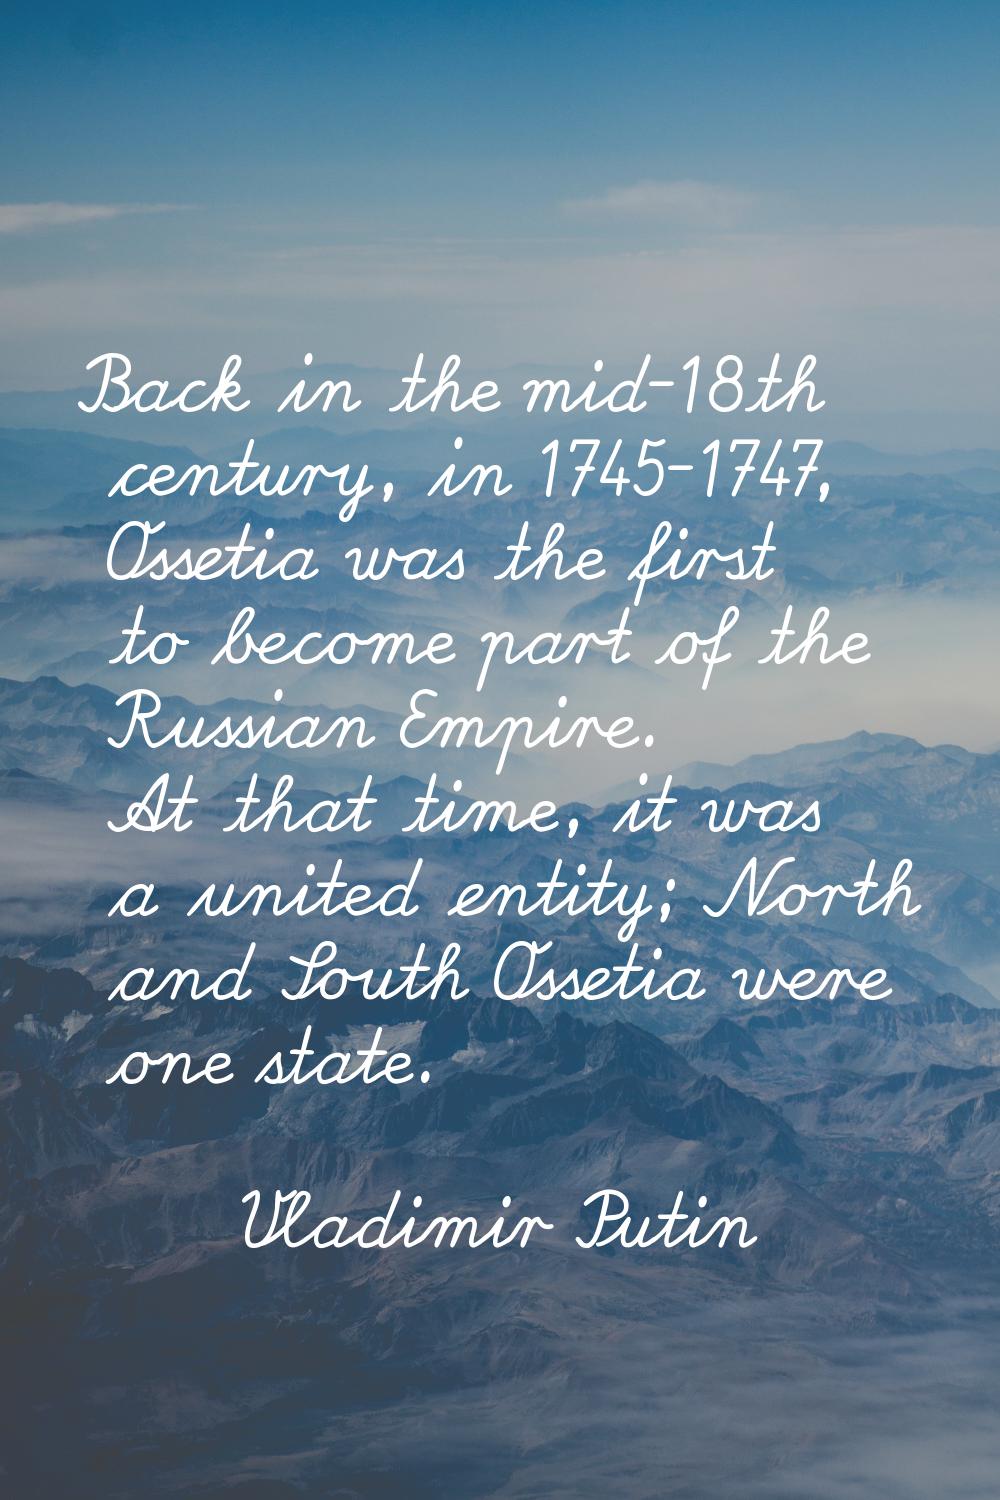 Back in the mid-18th century, in 1745-1747, Ossetia was the first to become part of the Russian Emp